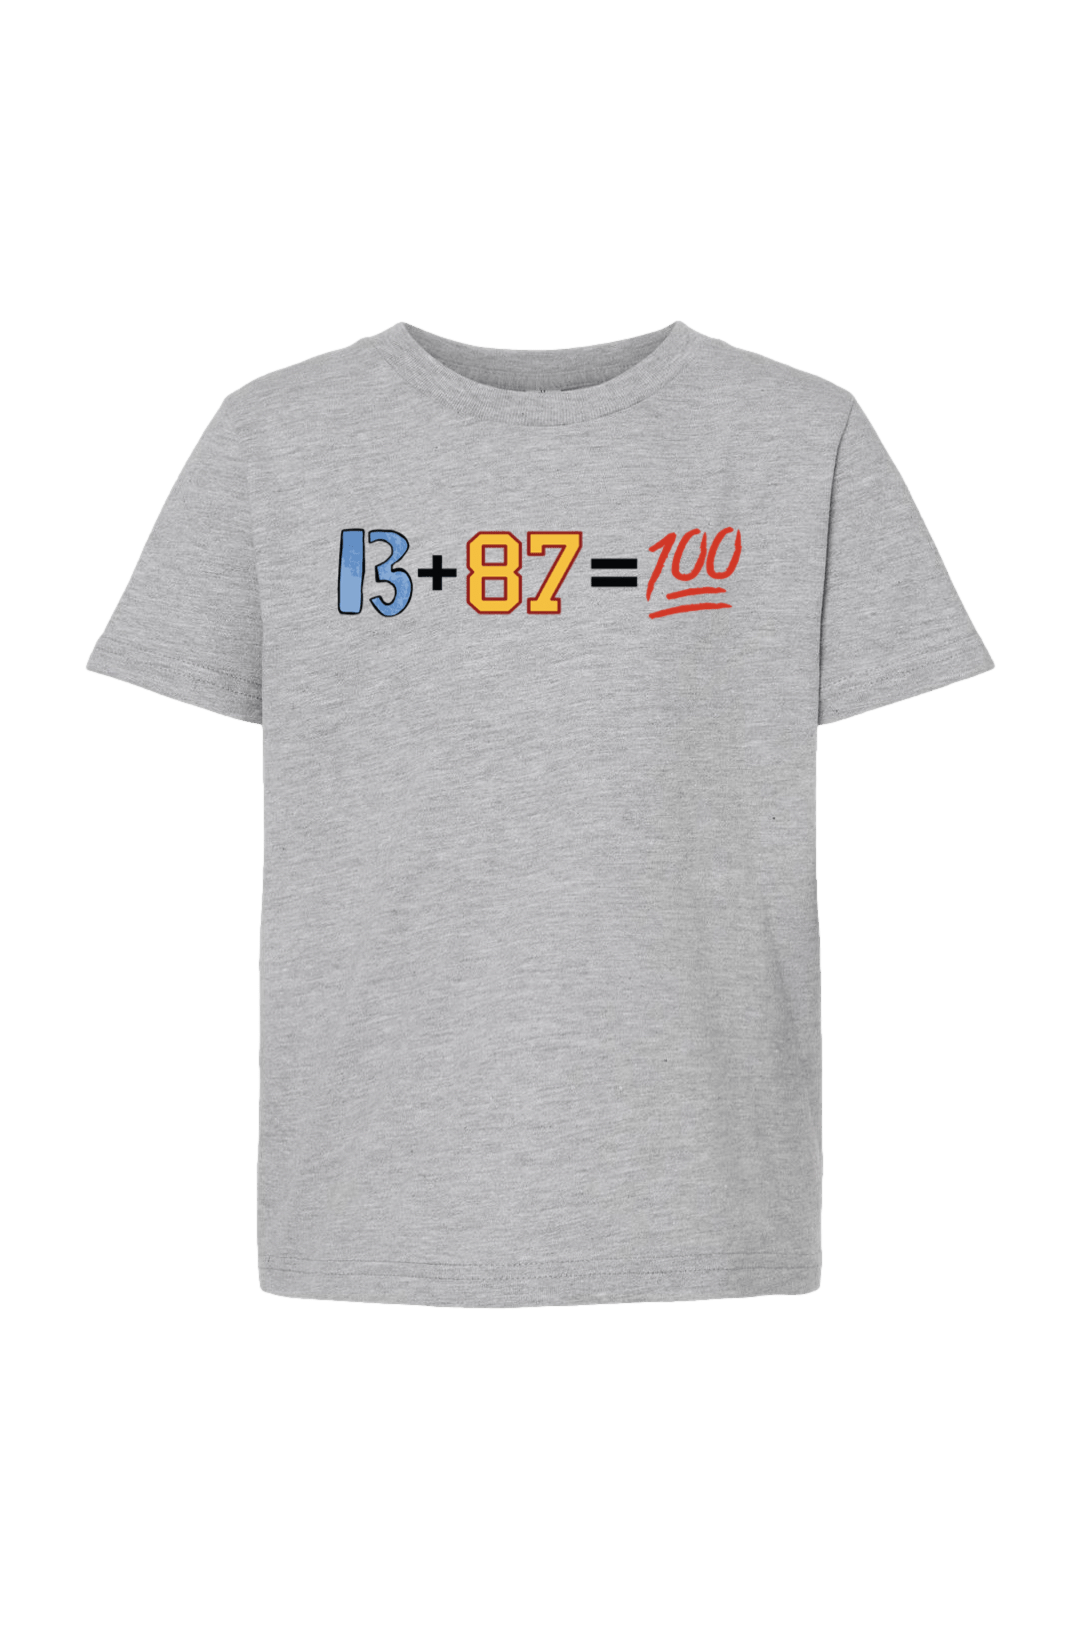 13+87=100 (YOUTH) - OBVIOUS SHIRTS